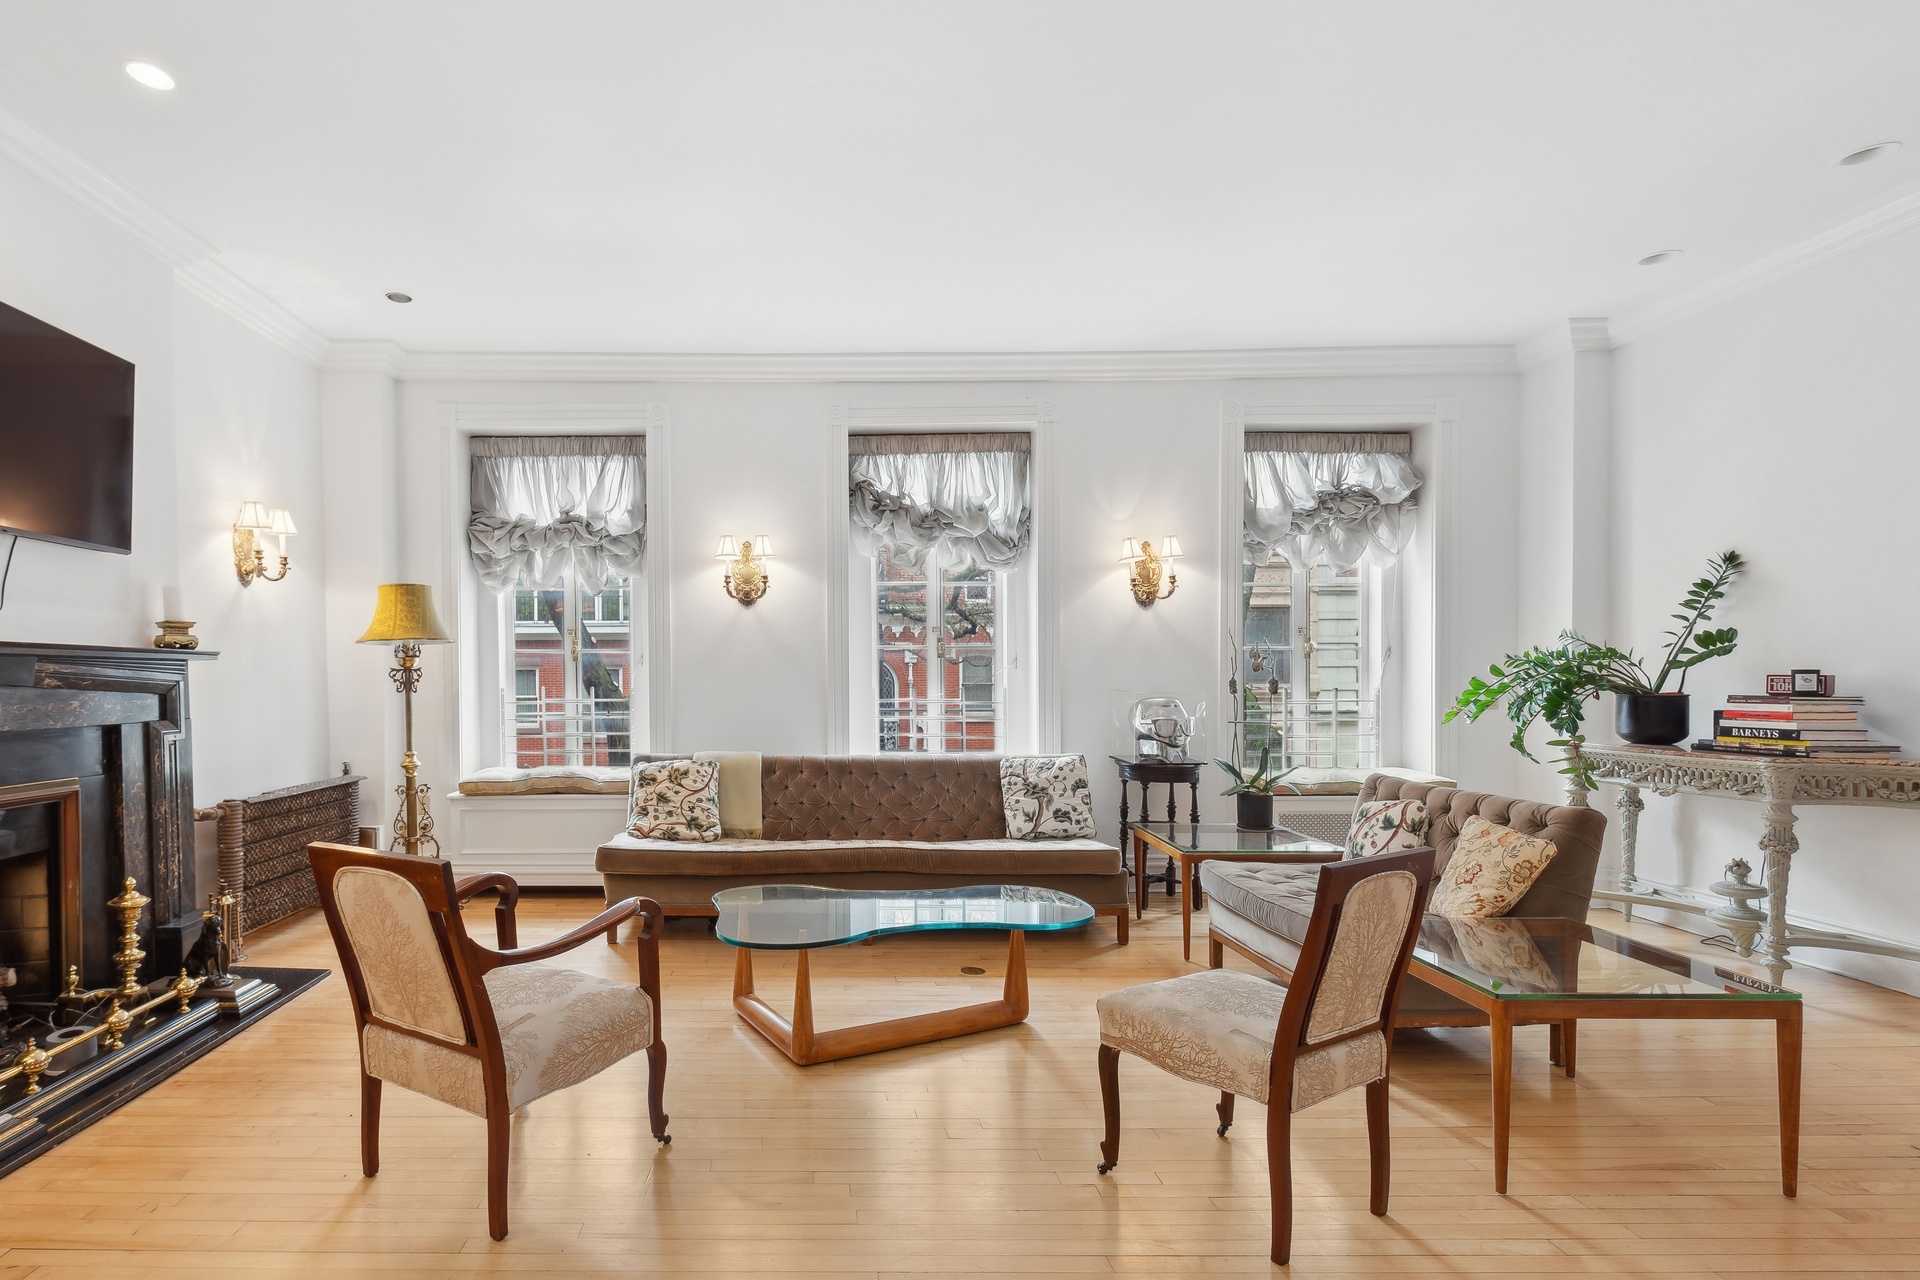 126 East 19th Street 2, Gramercy Park, Downtown, NYC - 4 Bedrooms  
3 Bathrooms  
9 Rooms - 